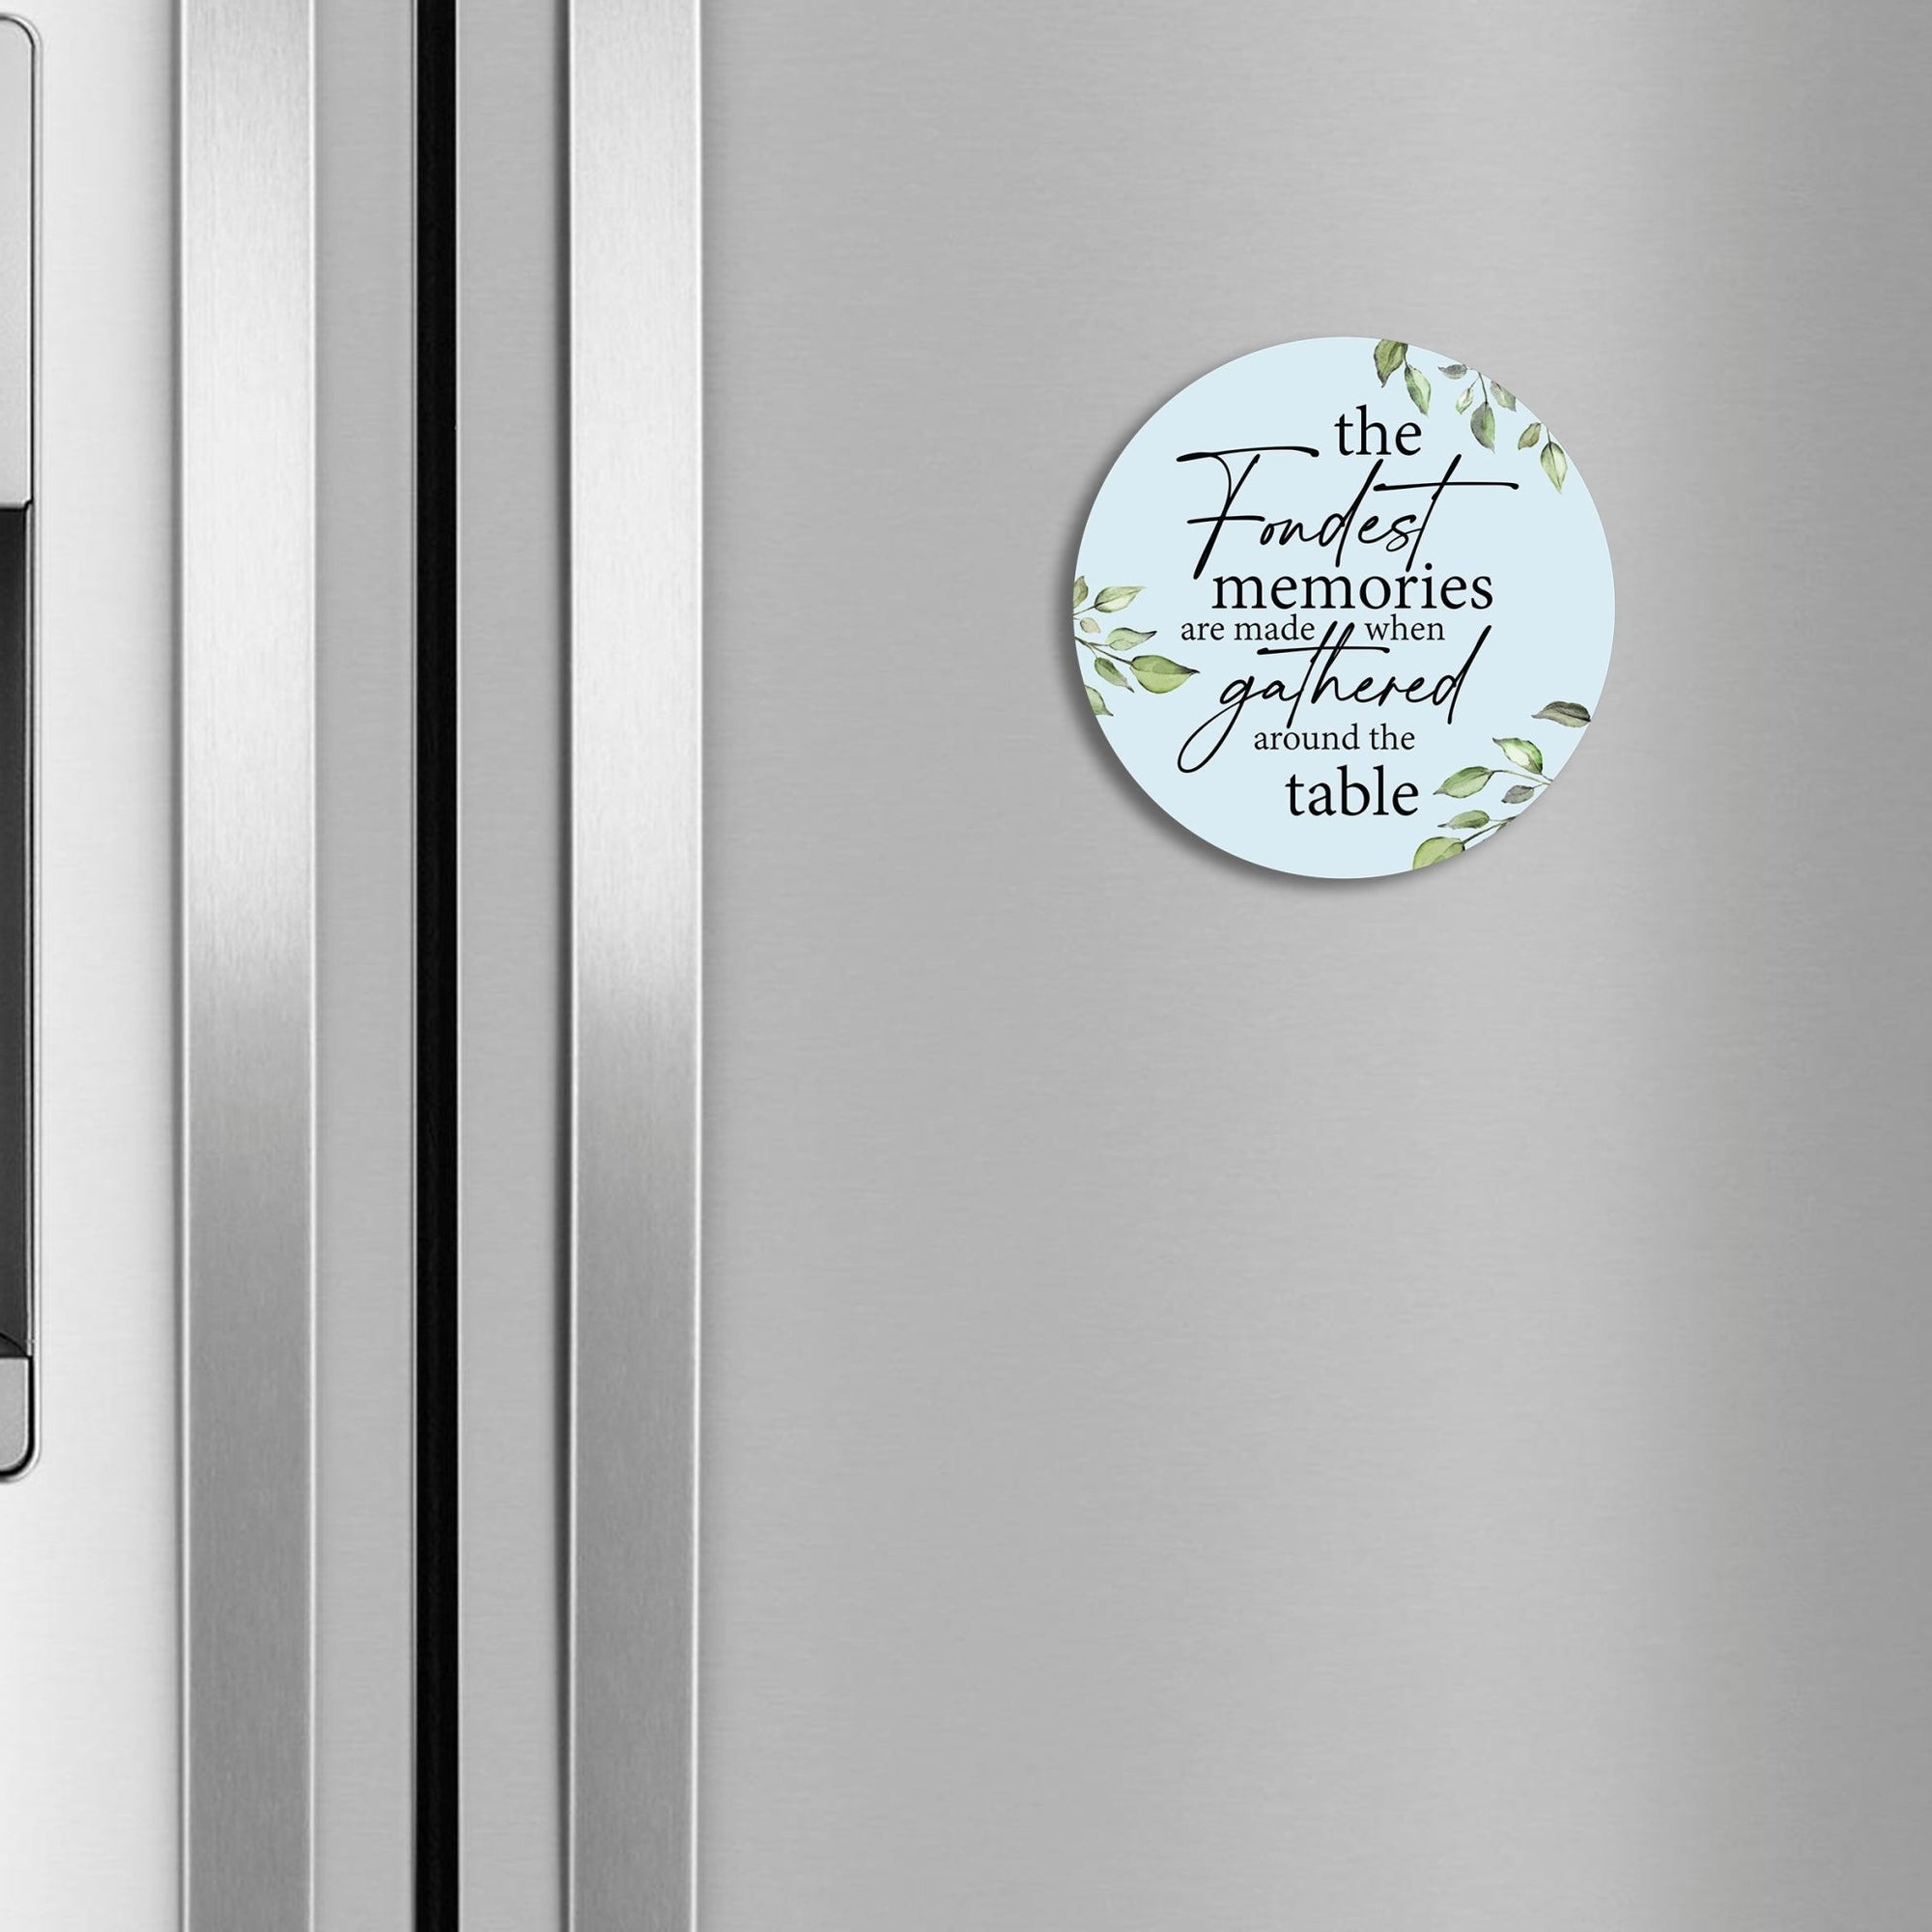 Family & Home Refrigerator Magnet Perfect Gift Idea For Home Décor - Fondest Memories